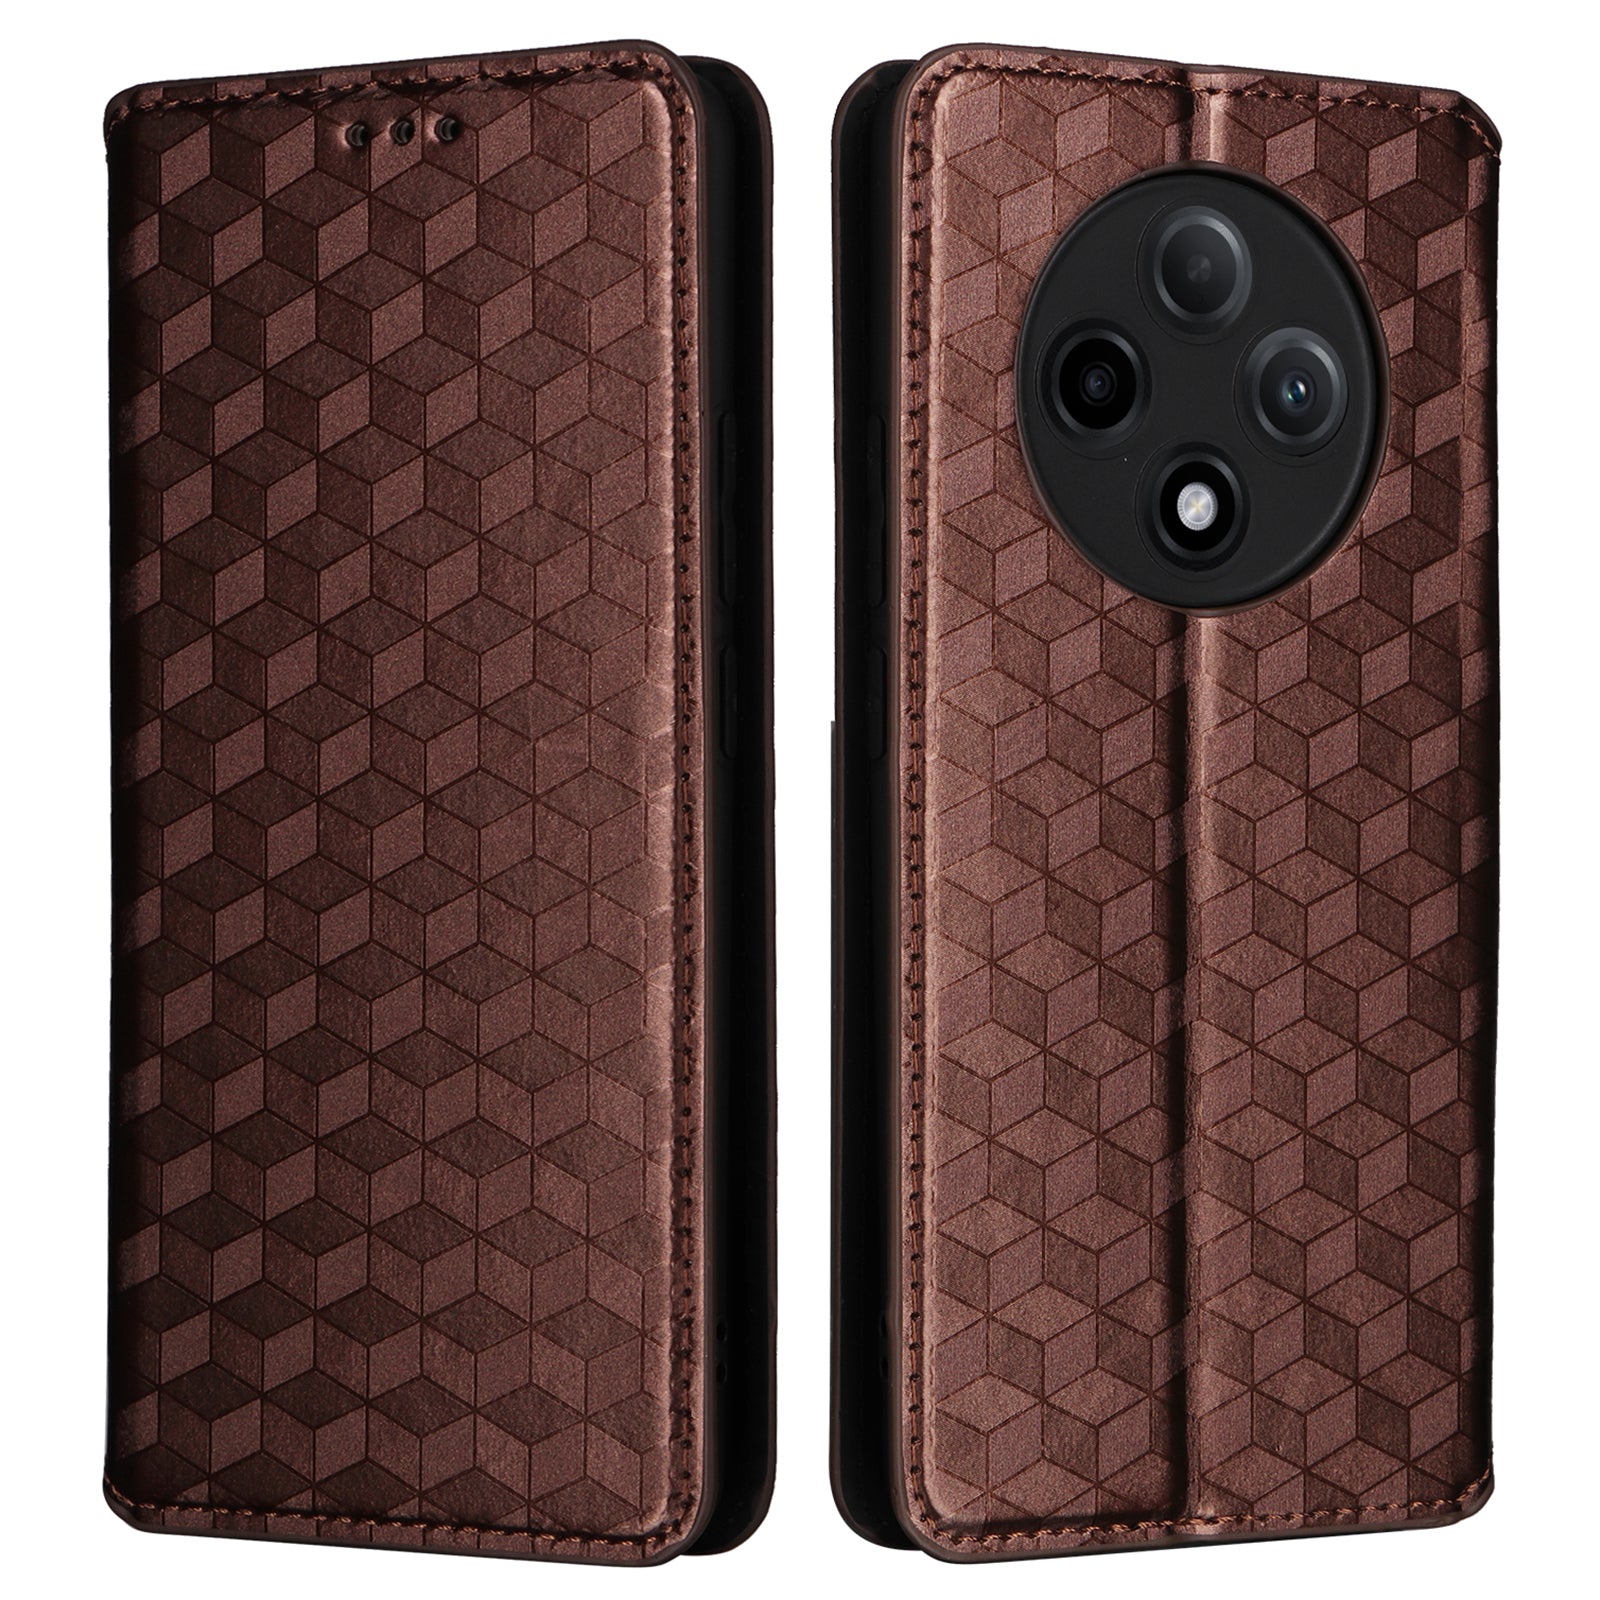 For Oppo A3 Pro 5G Leather Wallet Flip Cover Mobile Phone Case Wholesale - Brown